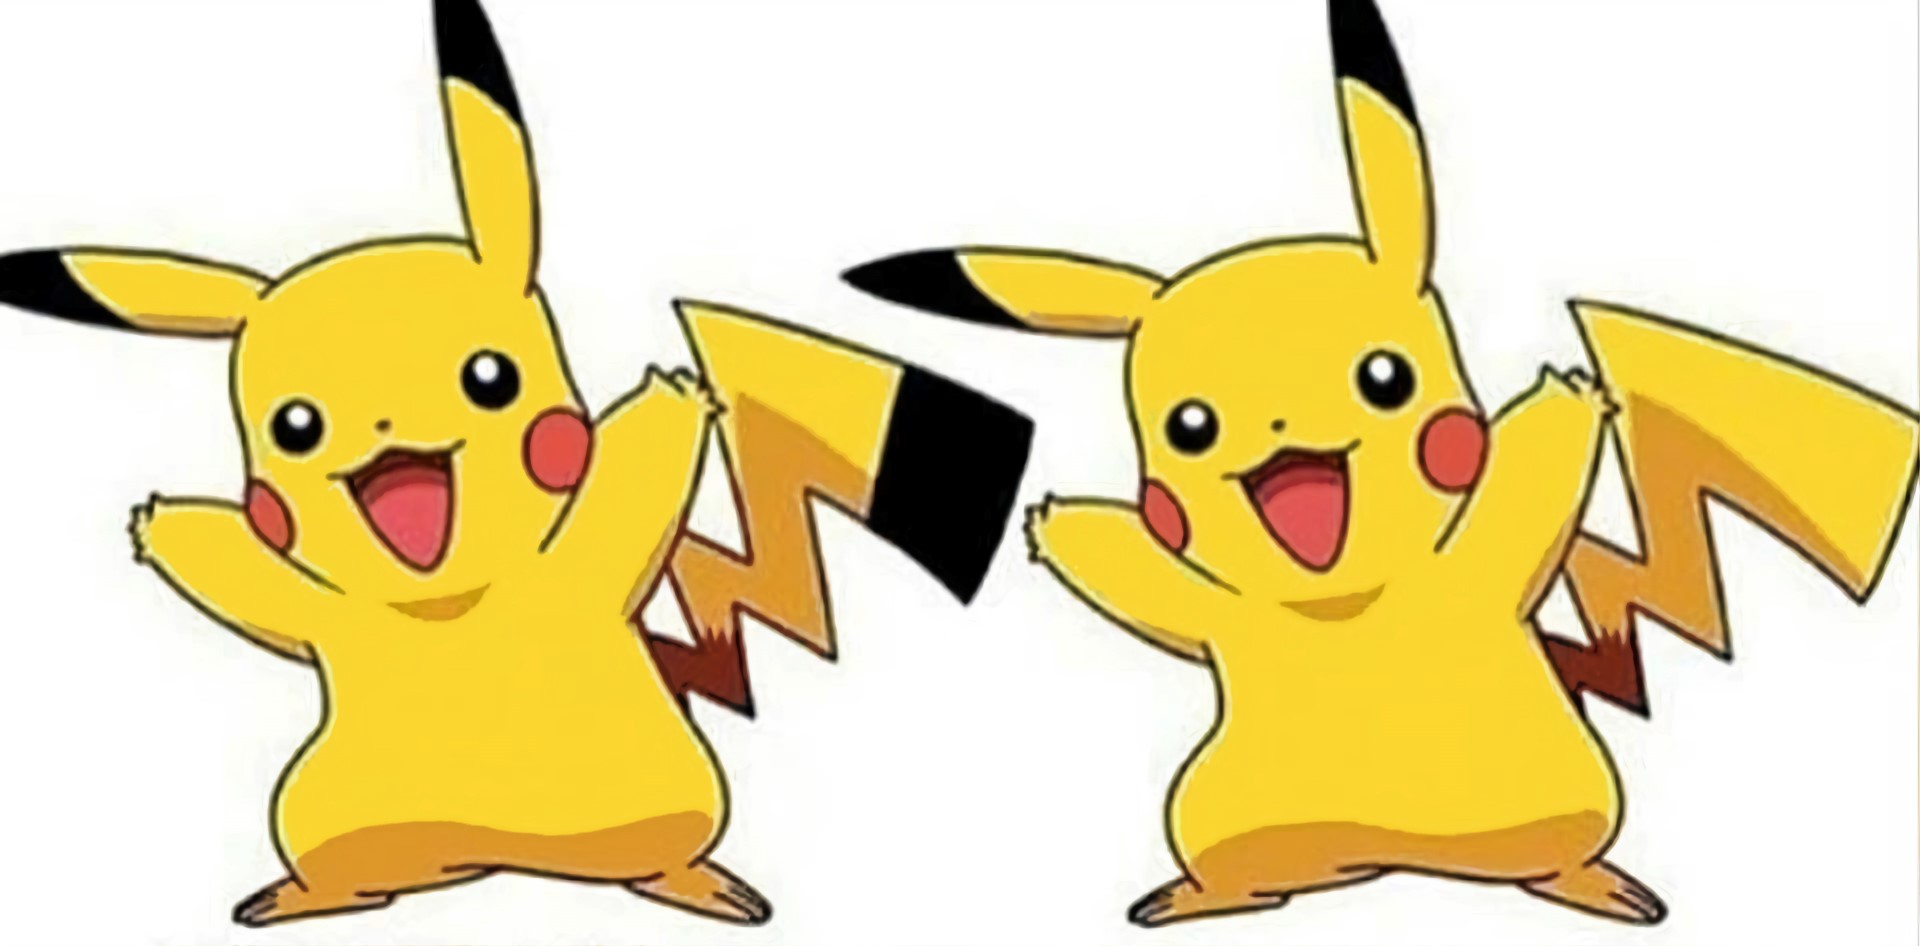 Does Pikachu Have a Black Tail or is it Mandela Effect?